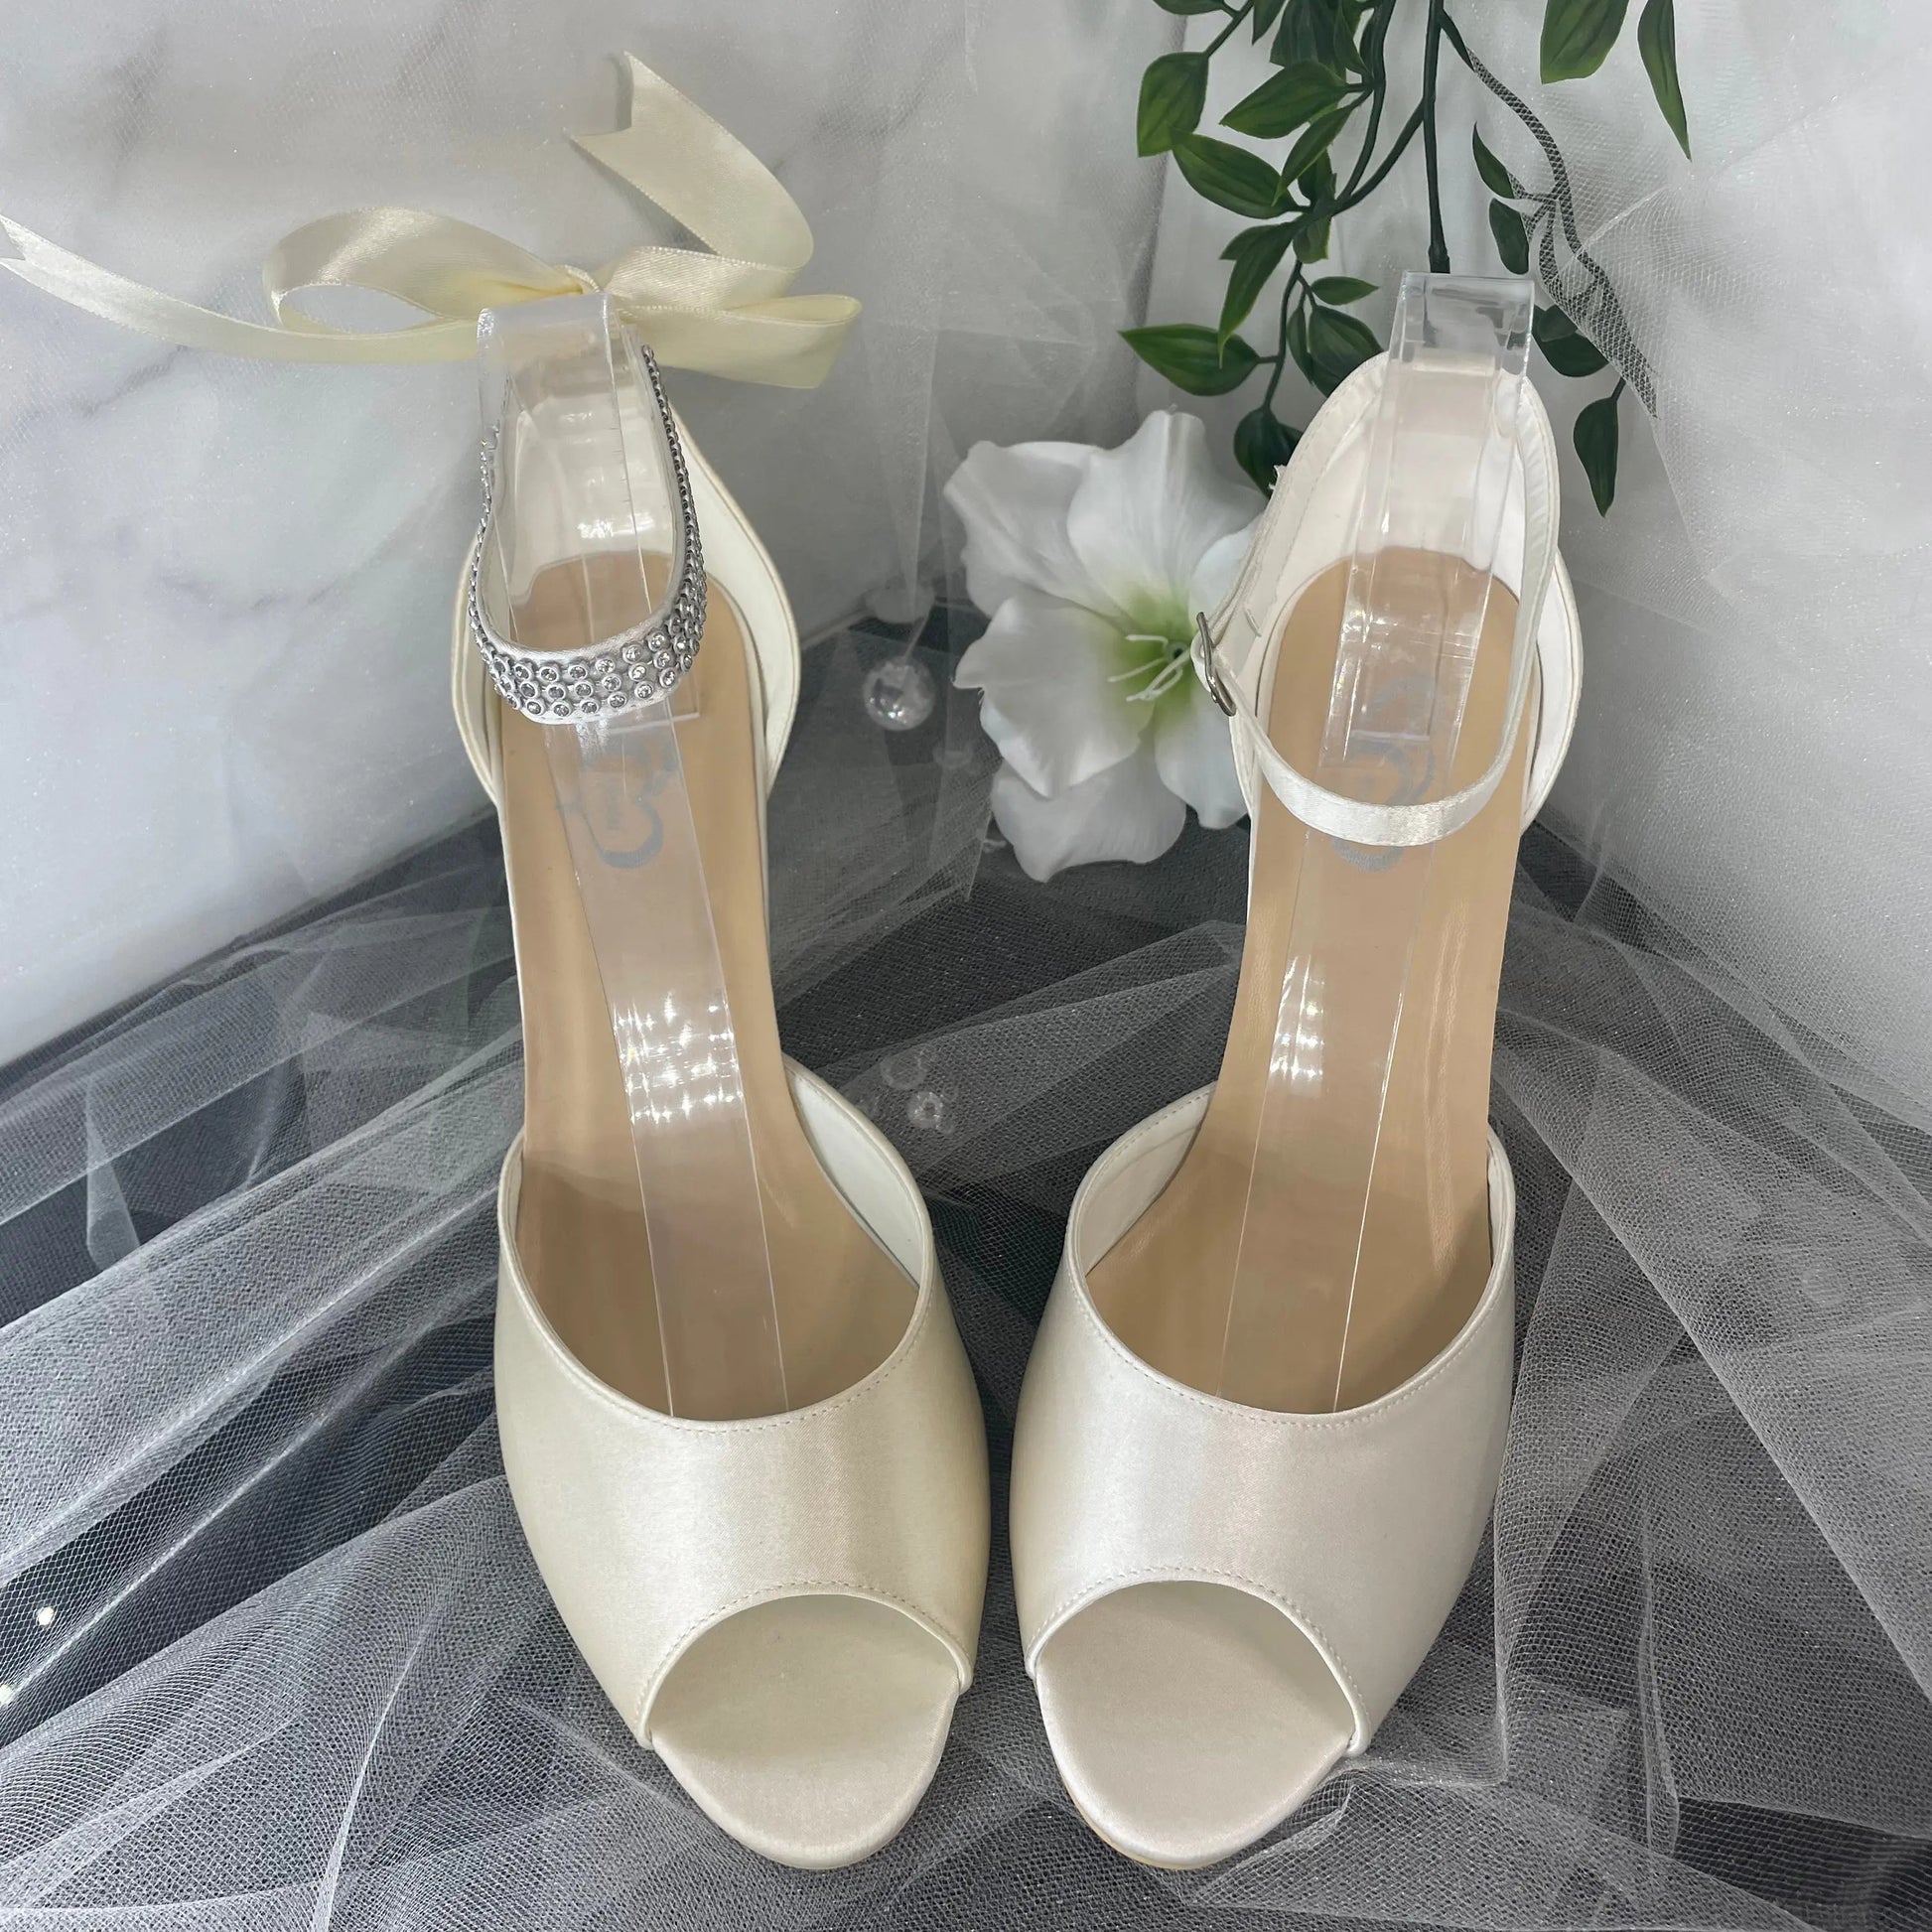 Faith Bridal Shoe Pair Front View Different Color: Front view of two Faith Peep Toe Diamanté Ankle Strap Wedding Bridal Shoes displaying the graceful design and slight color variation.